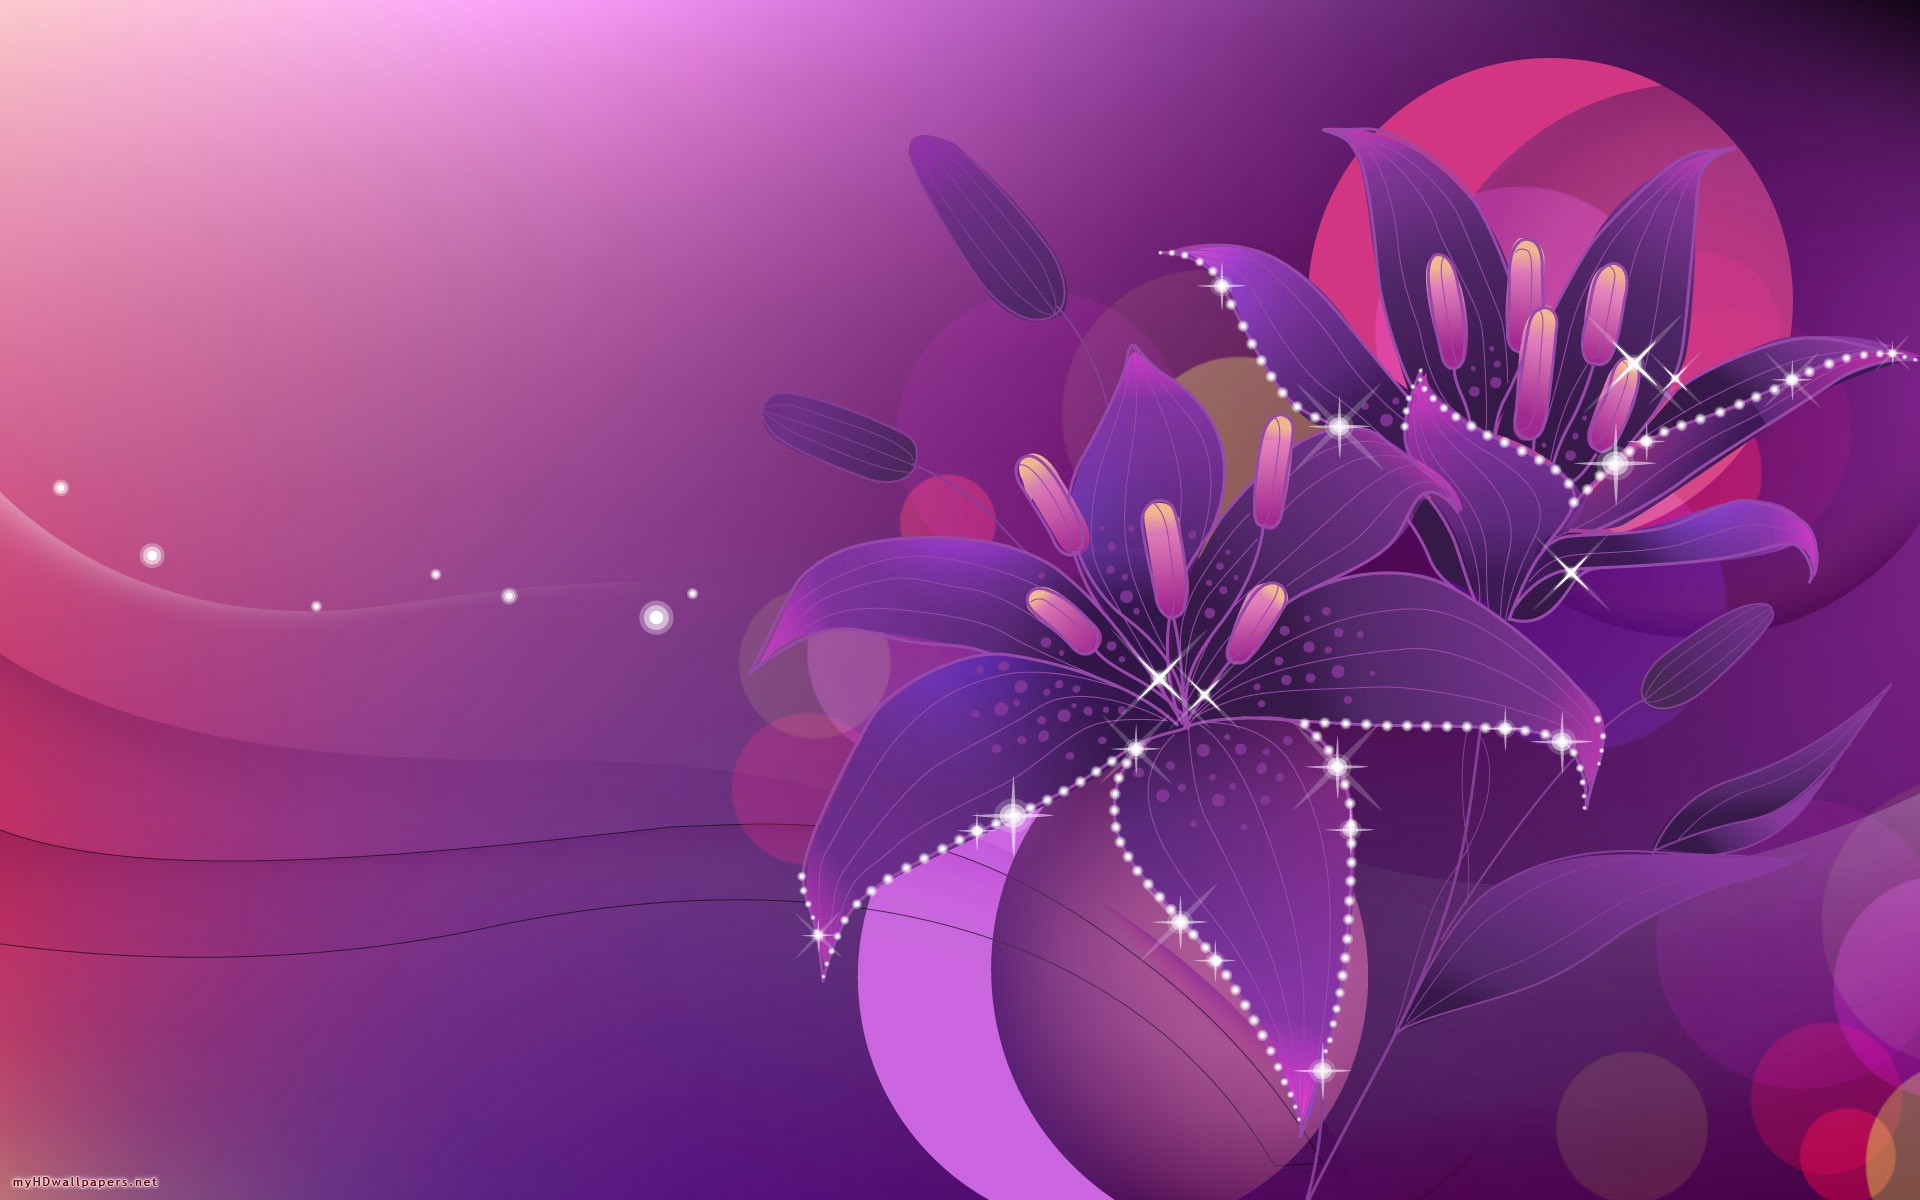 Free download purple 3d background image Purple 3D wallpapers